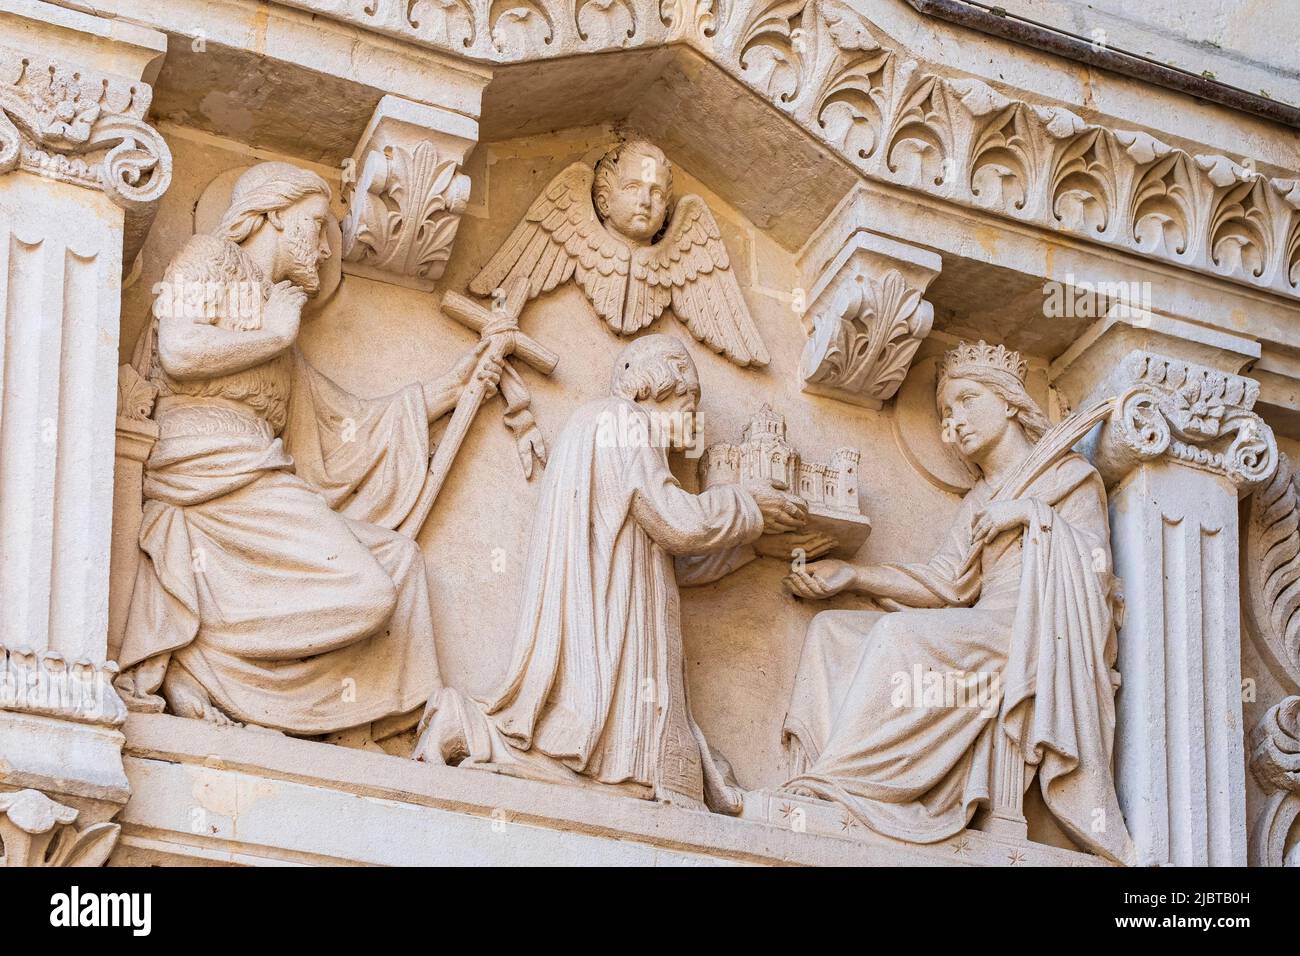 France, Ain, Ars-sur-Formans, Sanctuary of Ars dedicated to Saint Jean-Marie Vianney, patron saint of all priests in the universe, Saint-Sixtus basilica or Curé of Ars basilica, relief of St. Jean-Marie Vianney offering the new church to St. Philomena Stock Photo